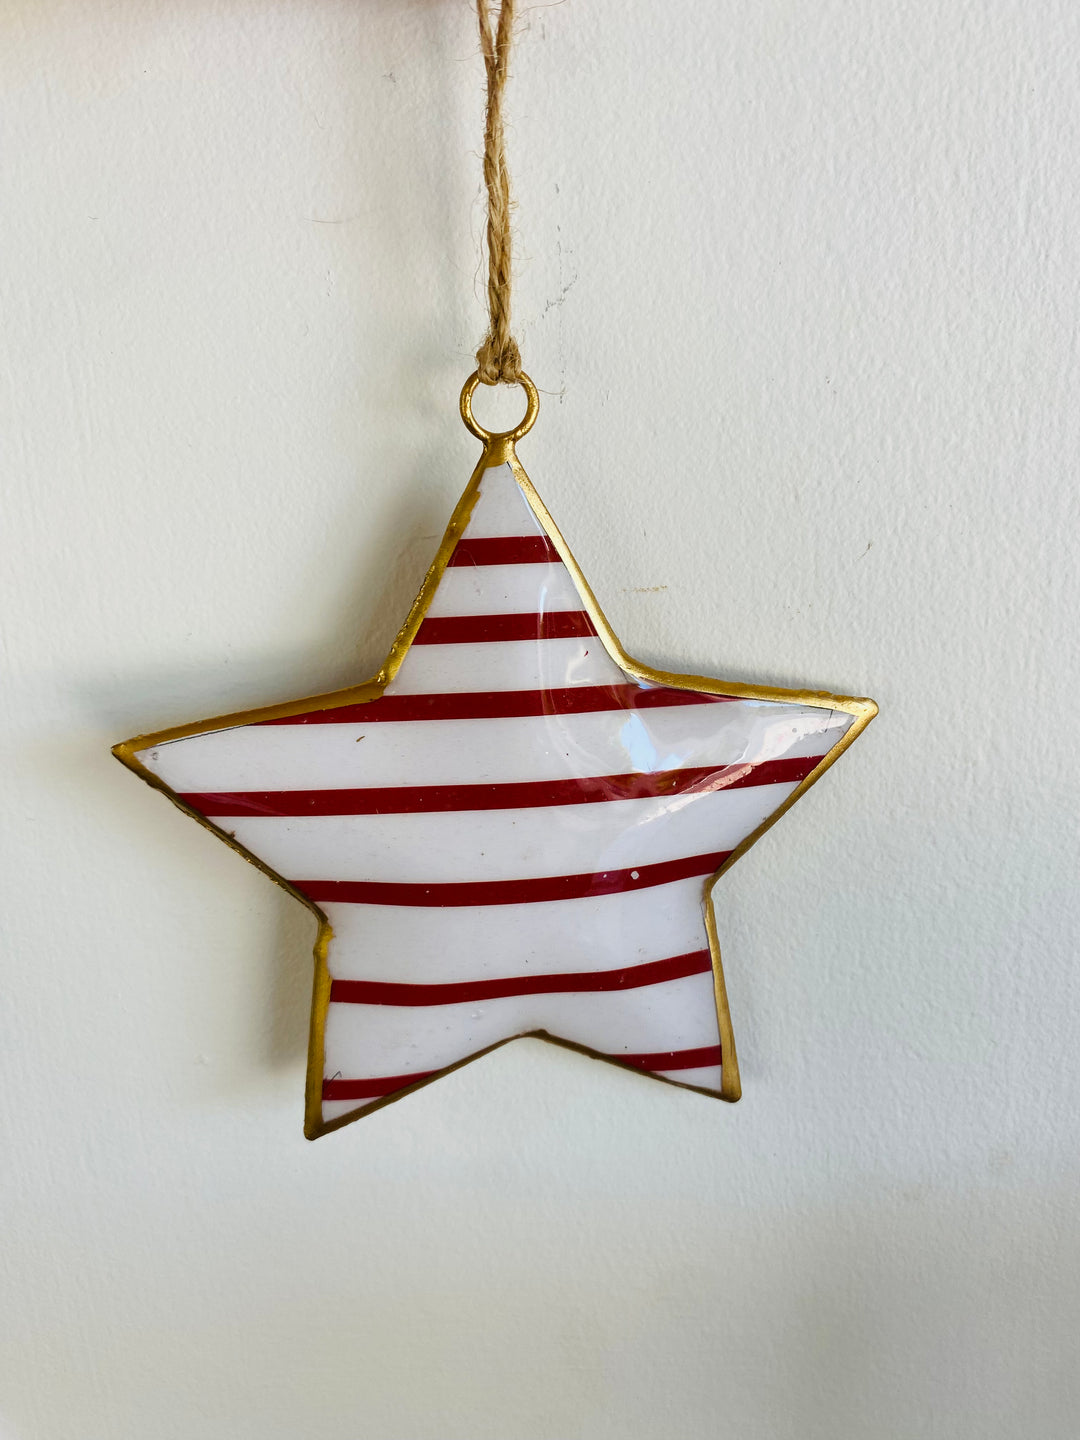 Repurposed Iron Christmas Decoration of White star with Red Stripes